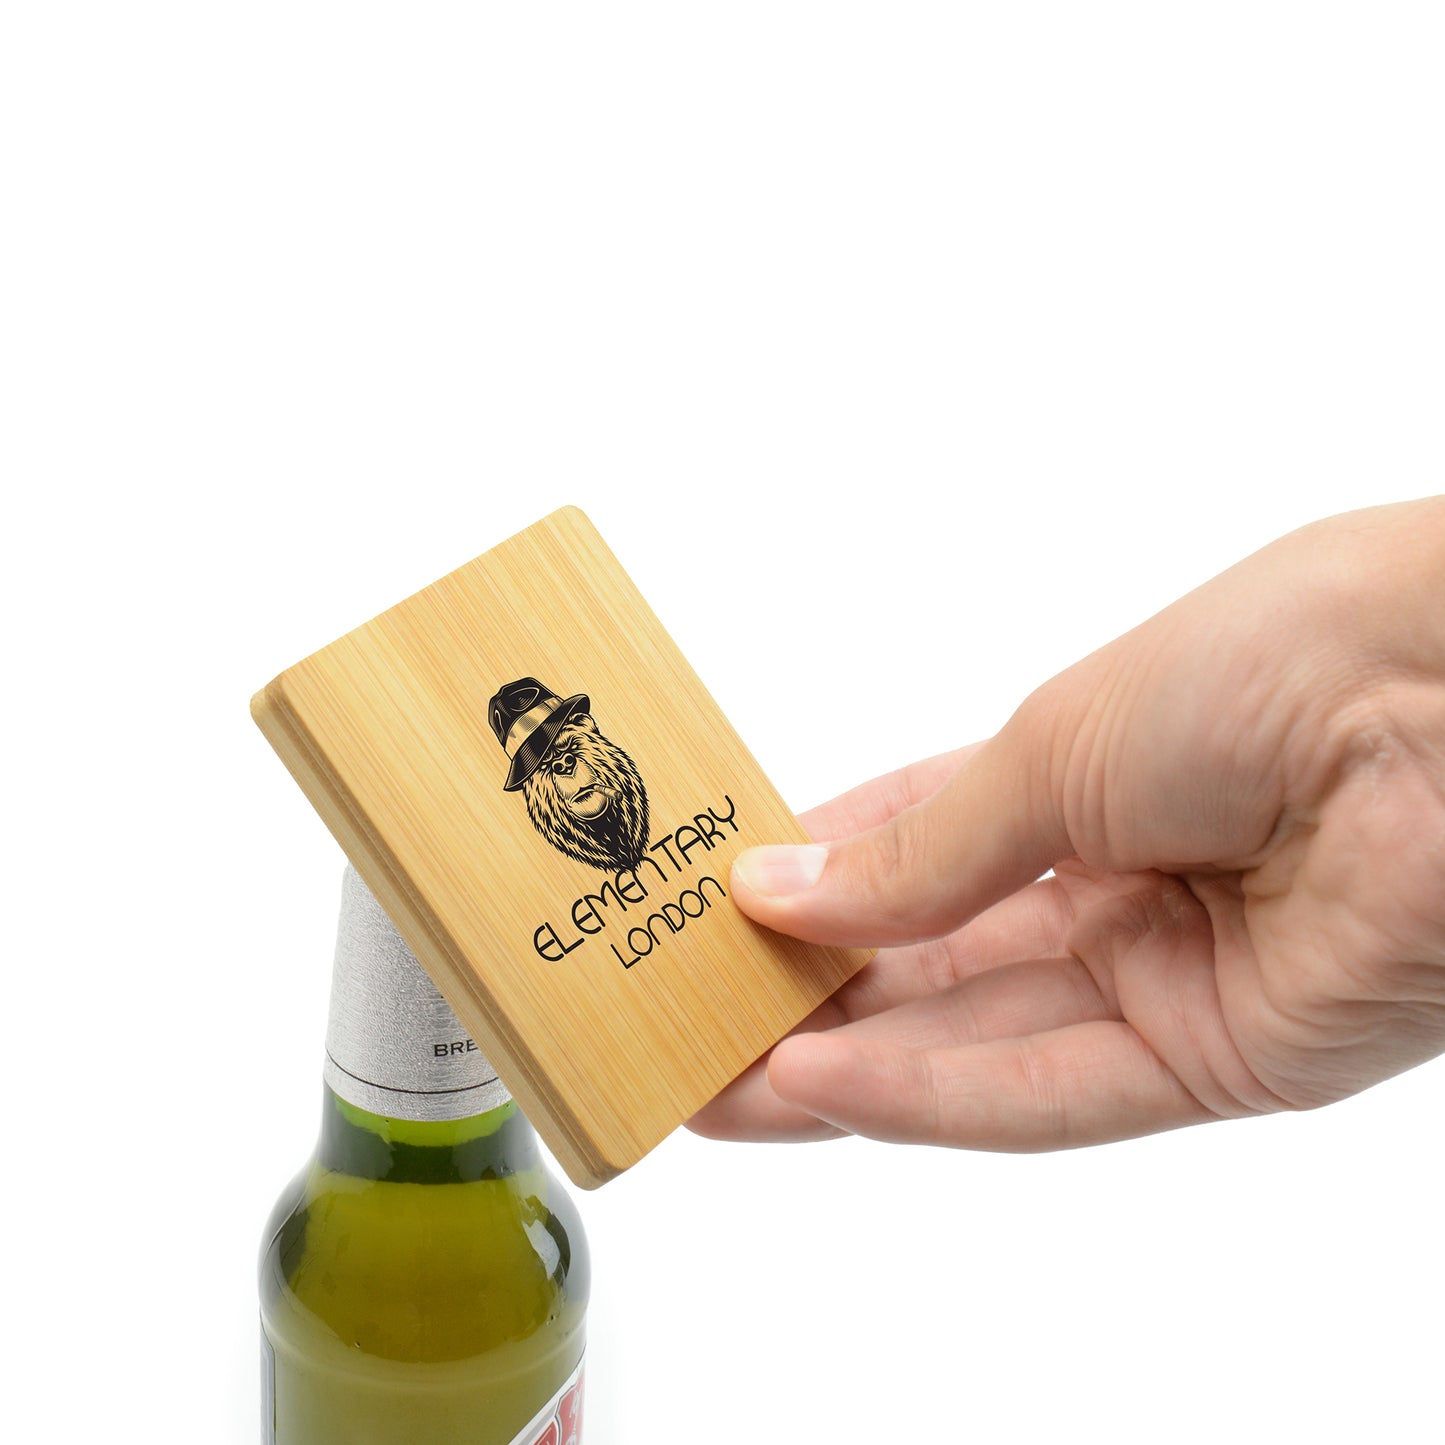 BLANE 2 IN 1 PROMOTIONAL BAMBOO COASTER AND BOTTLE OPENER